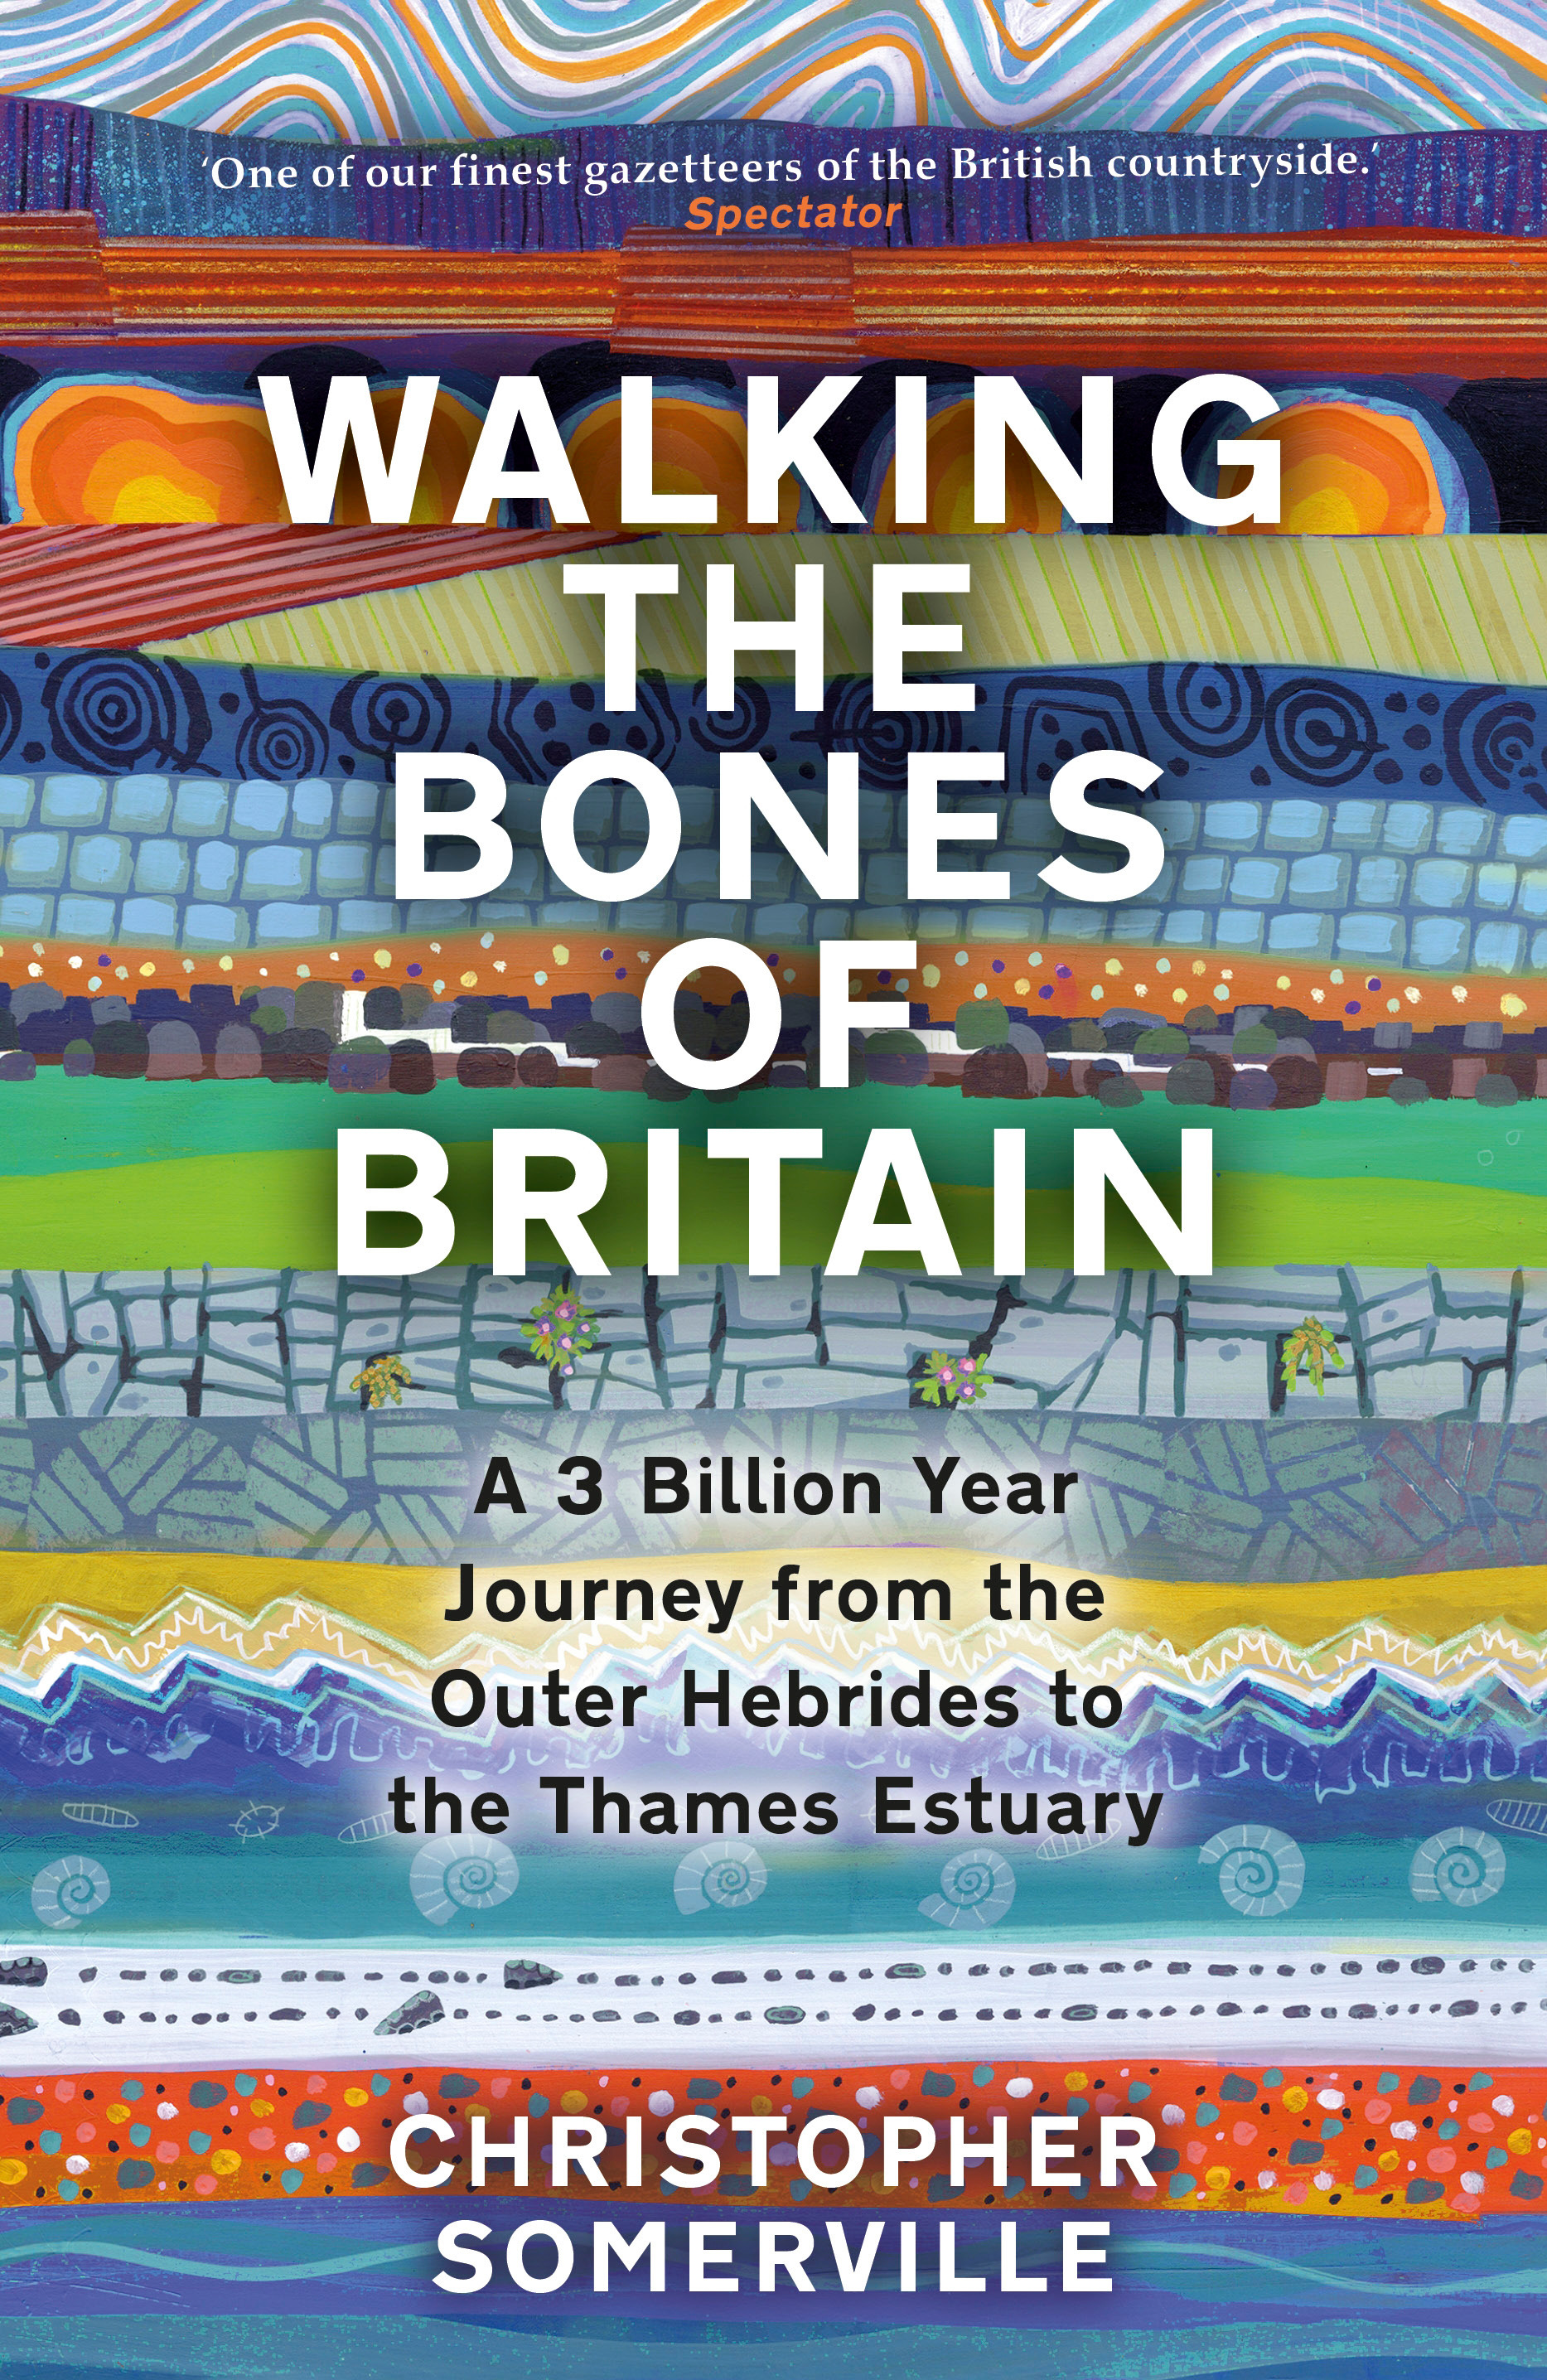 Walking the Bones of Britain : A 3 Billion Year Journey from the Outer Hebrides to the Thames Estuary | Somerville, Christopher (Auteur)